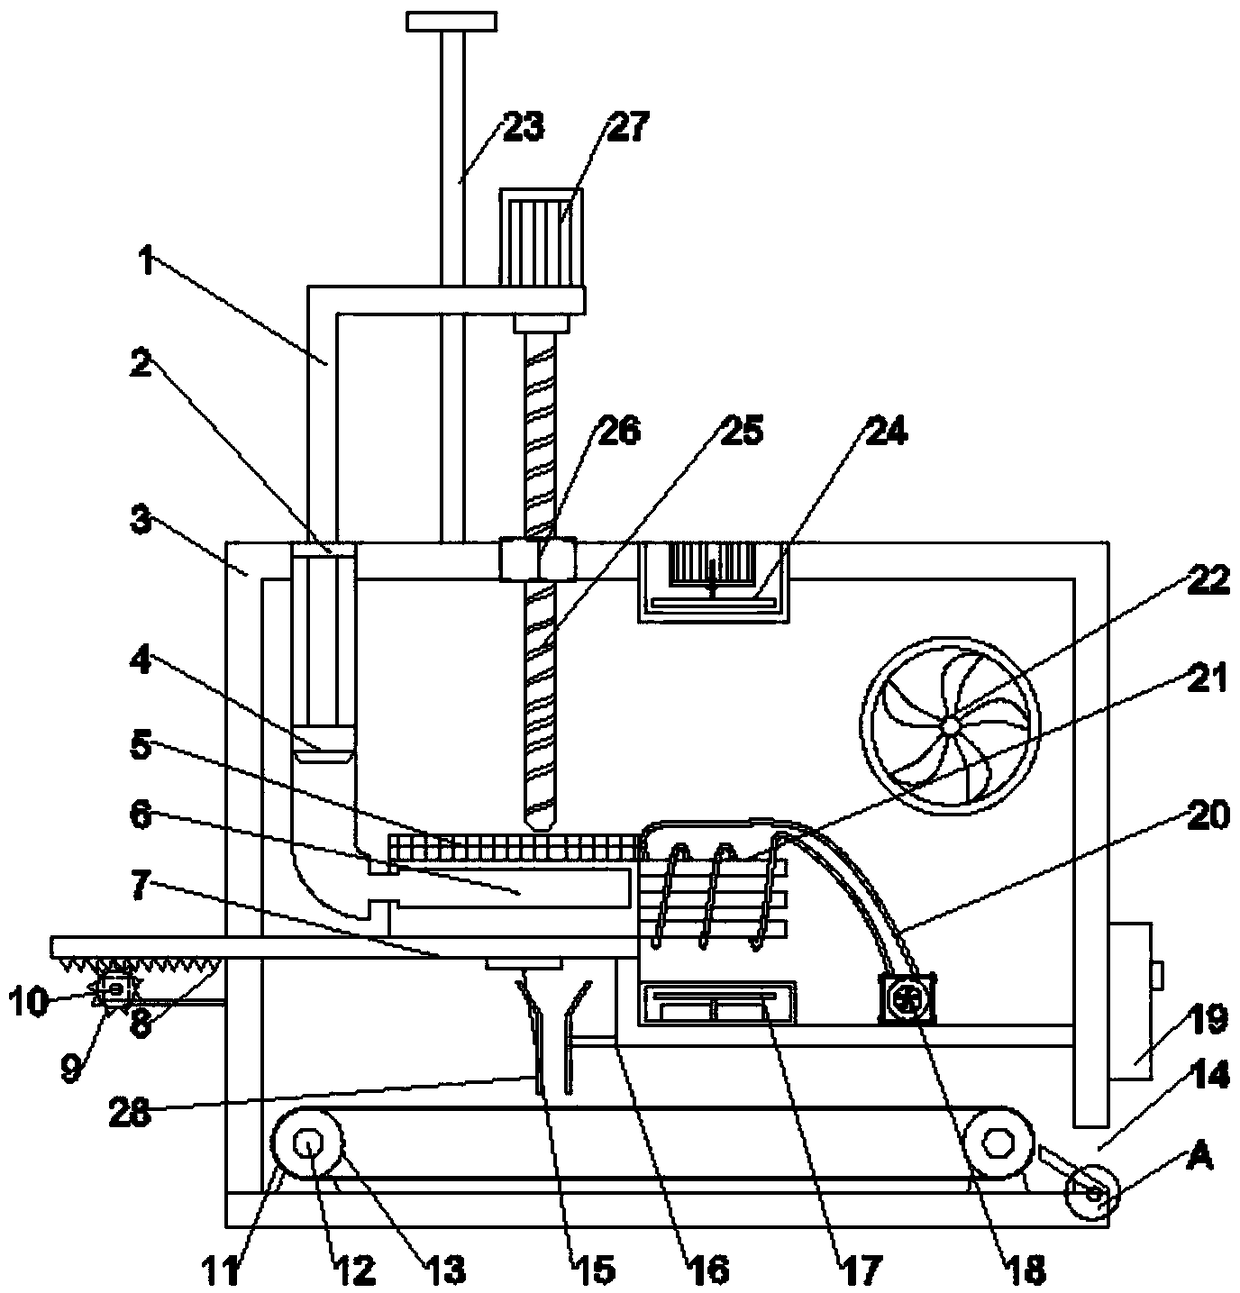 Molding device for processing of plastic shoes